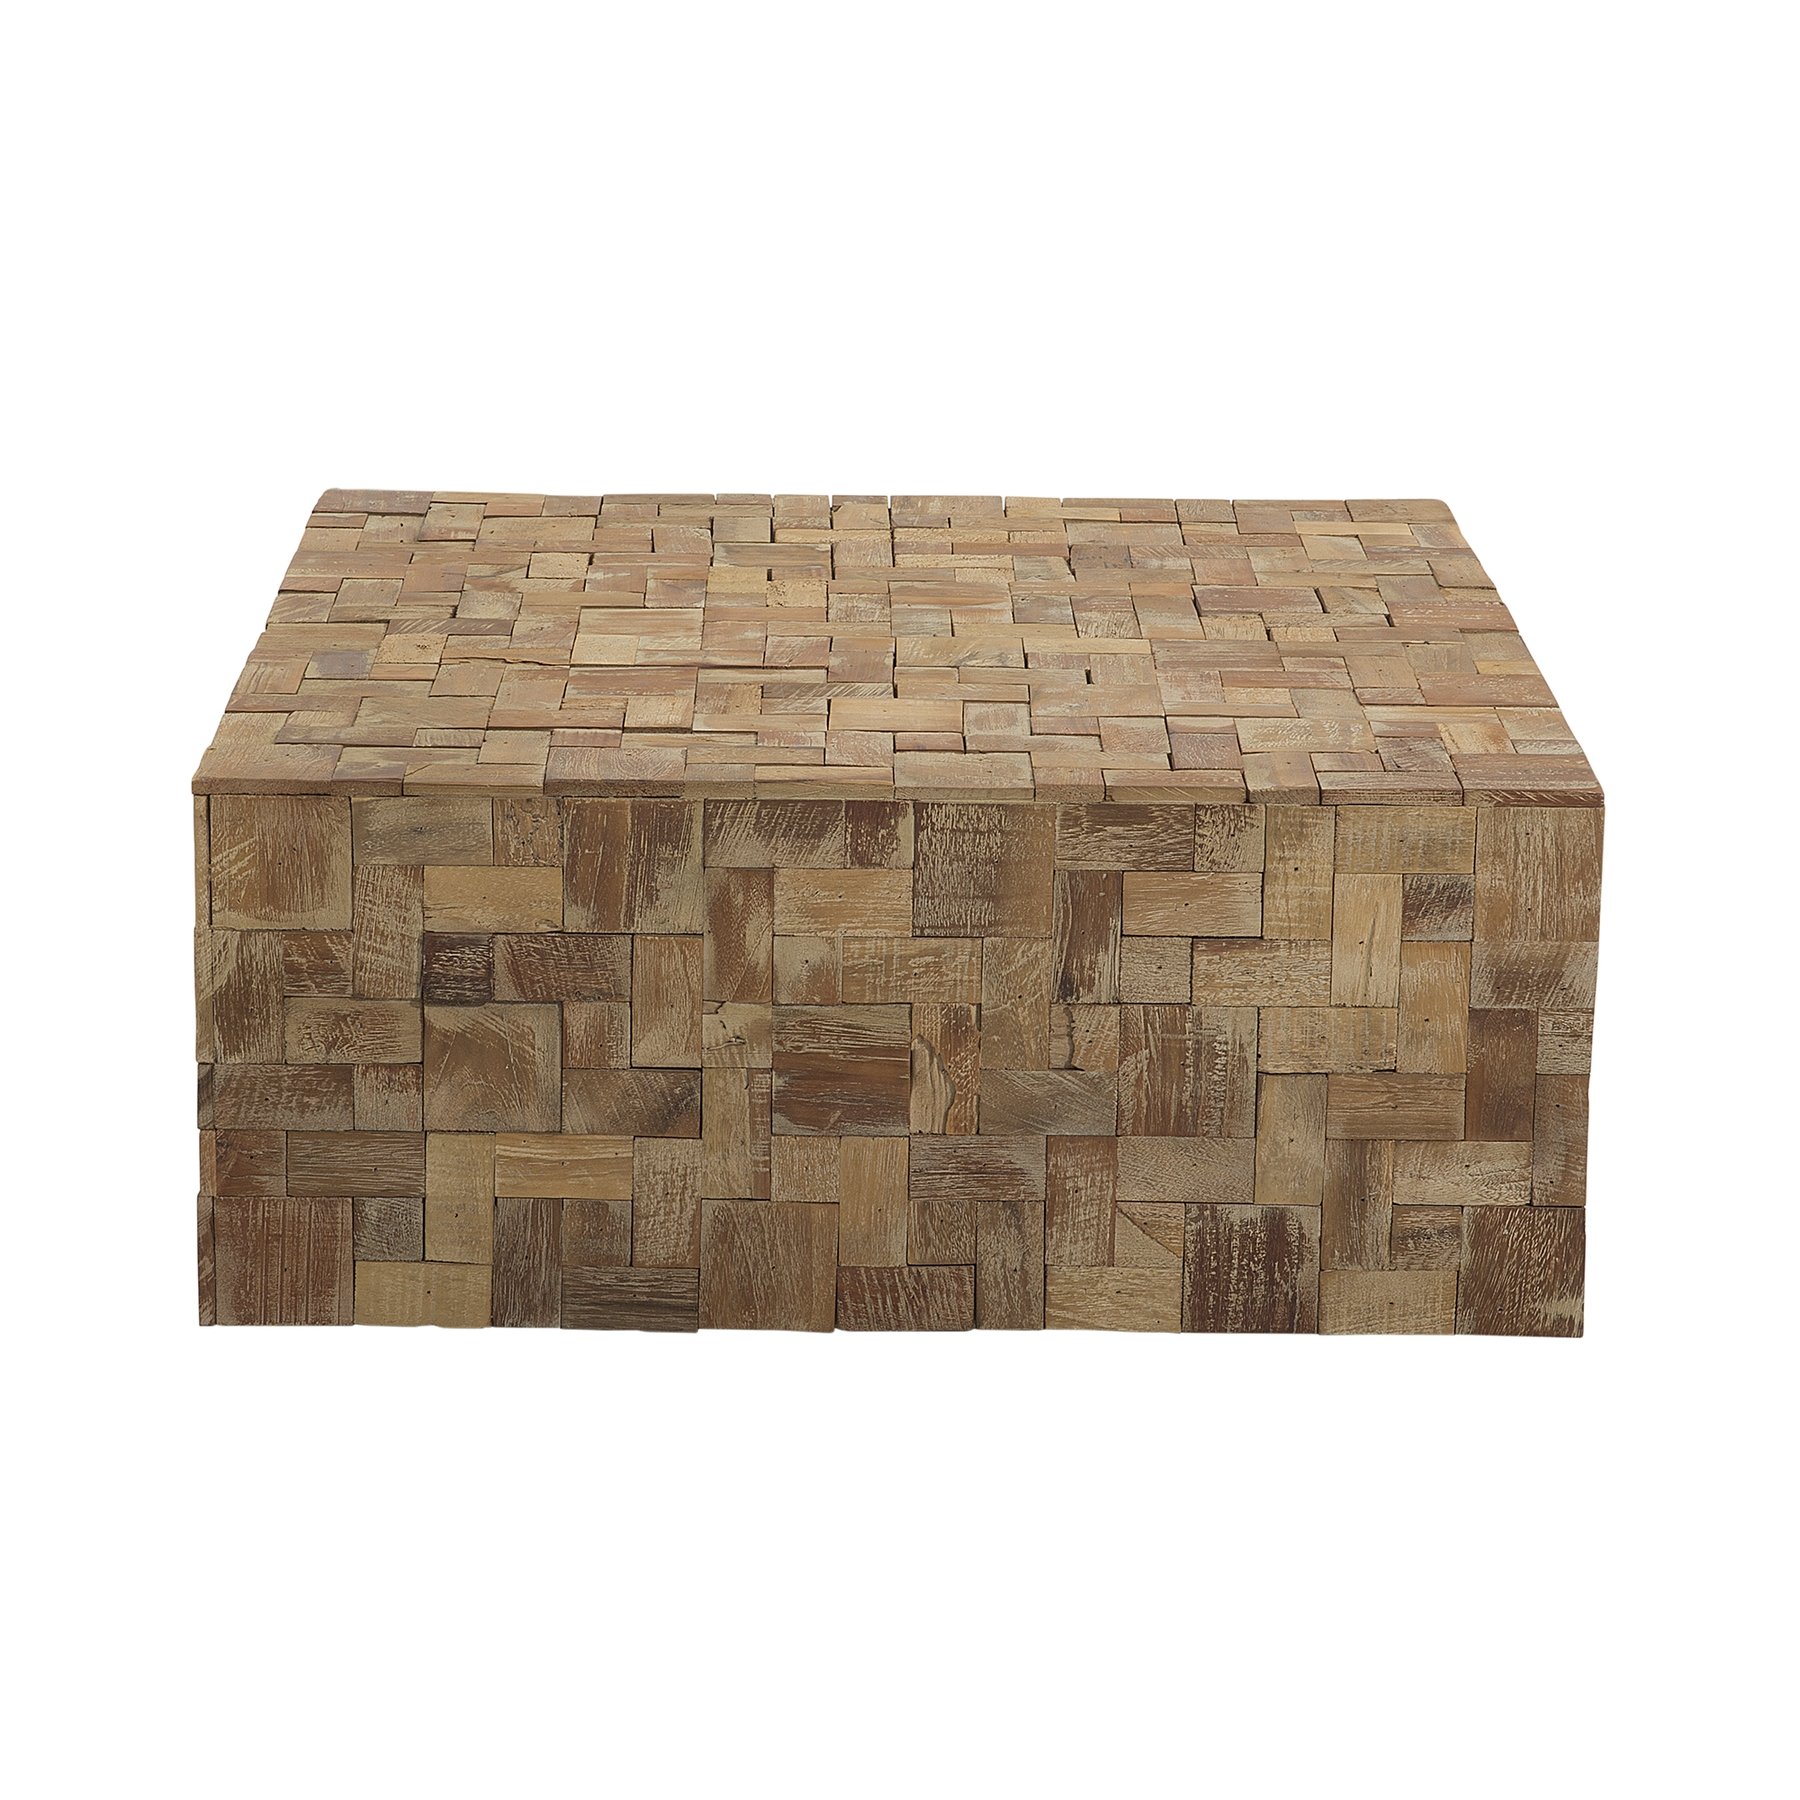 teak wood accent coffee table rectangular mosaic design gambo undef src type whitenosh pieces unique geometric that will fit perfectly into any modern industrial interior